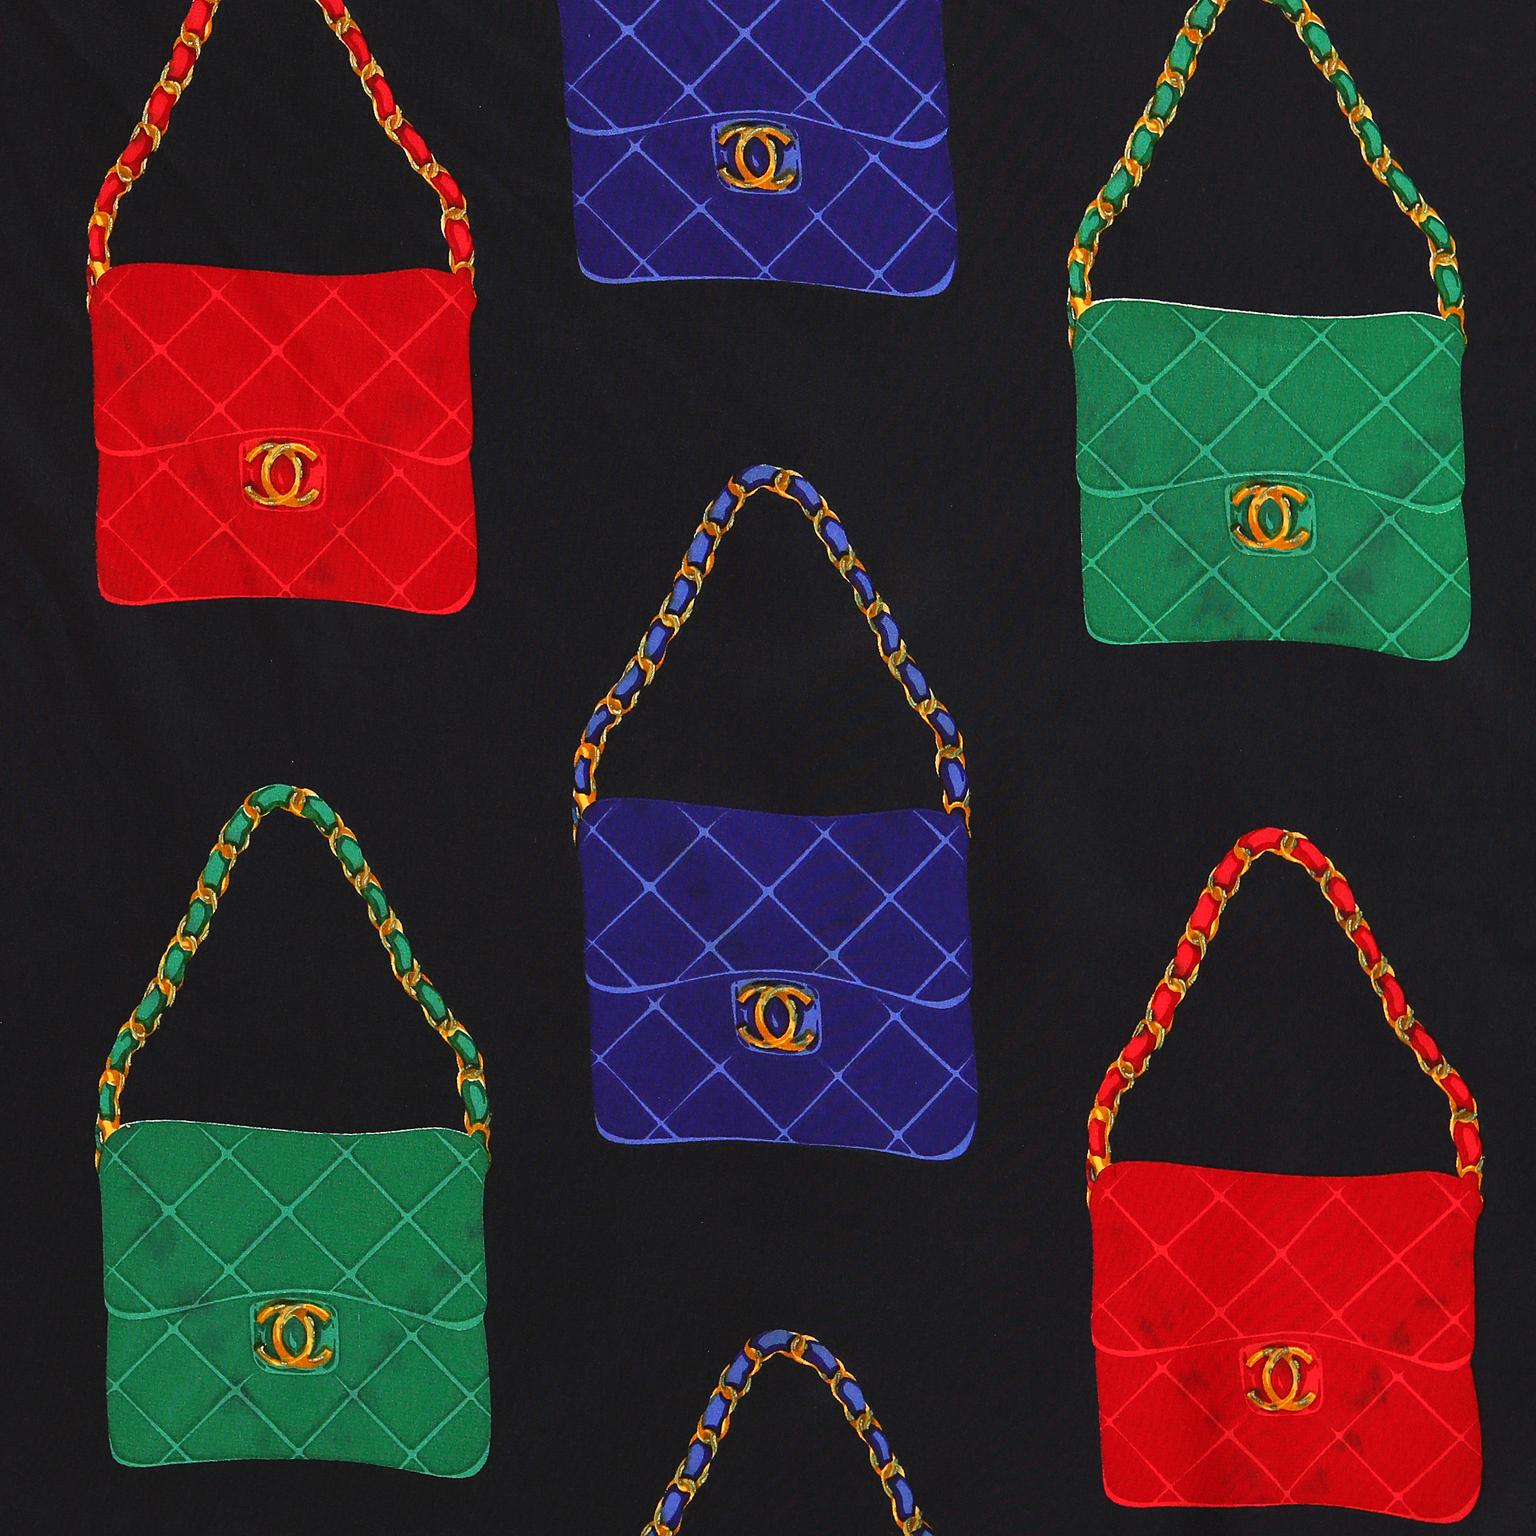 This authentic Chanel Silk Handbags Scarf is in excellent condition.  Black background with a red border.  Red, blue and green classic flaps create the pattern. 100% silk.
Measurements: 34” x 34”
A407
